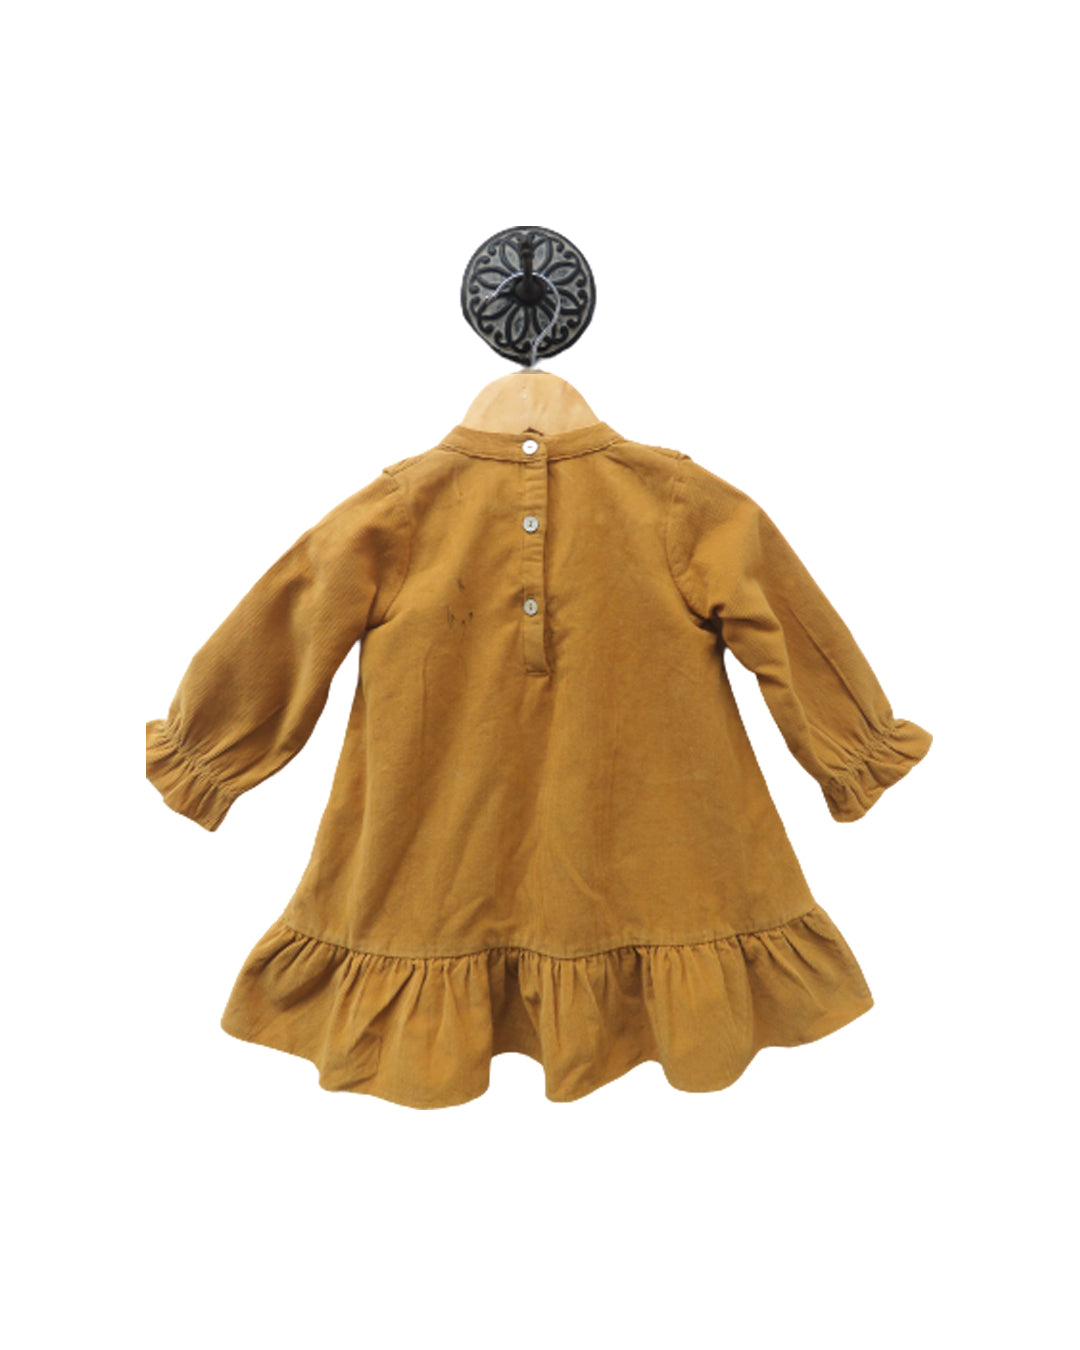 YELLOW SOFT AND COZY WINTER DRESS WITH A FRILL YOKE